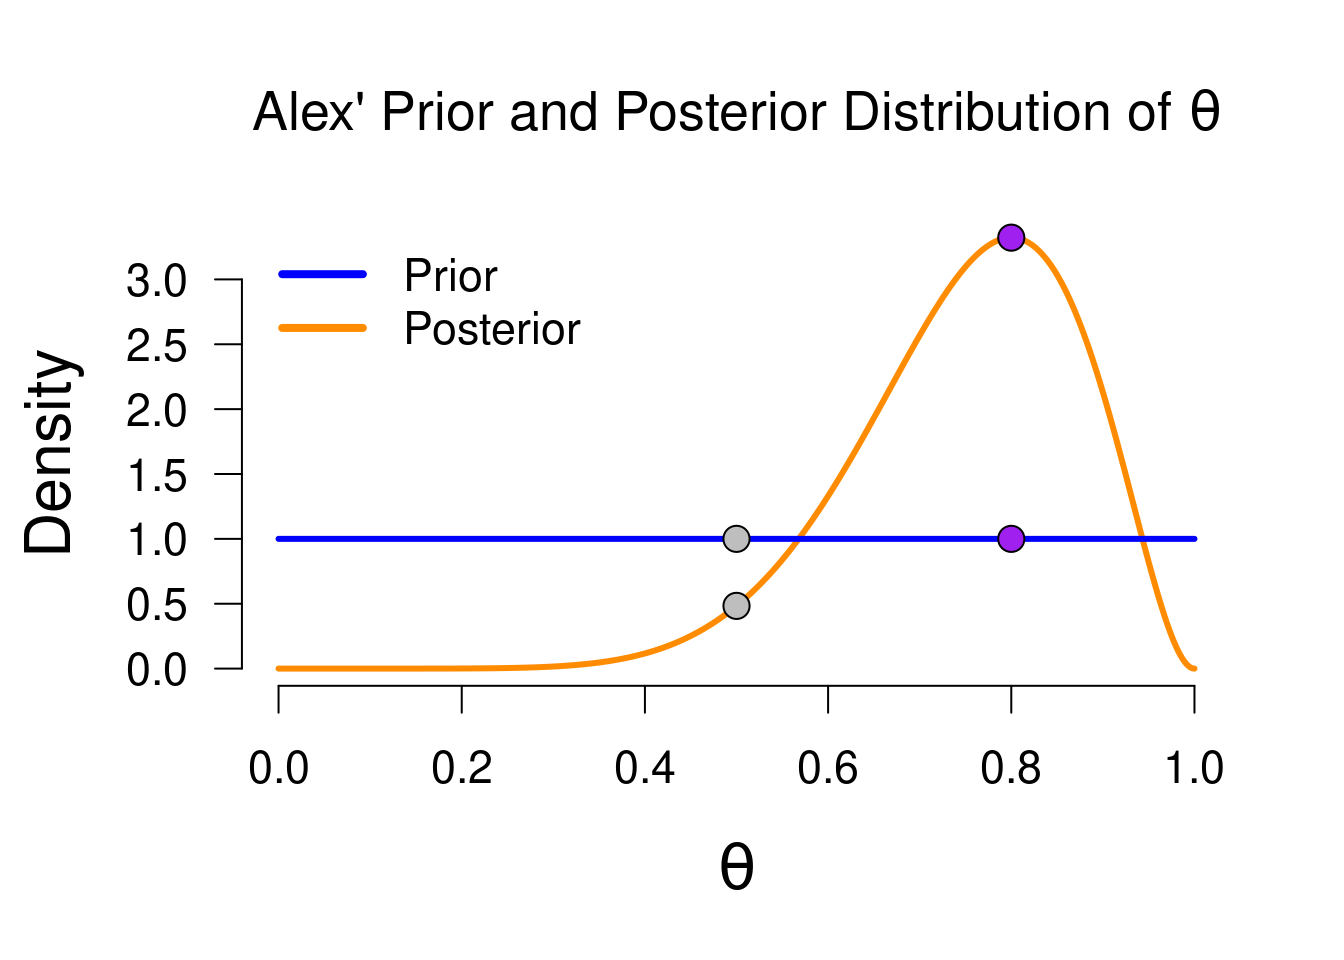 Prior and posterior distribution for Alex, with the grey/purple dots indicating the prior/posterior density values for two test values: 0.5 and 0.8. The ratio of the grey values is equal to the Bayes factor comparing Alex' and Sarah's models, while the ratio of the purple values is equal to the Bayes factor comparing Alex' and Paul's models. This ratio is known as the Savage-Dickey density value.